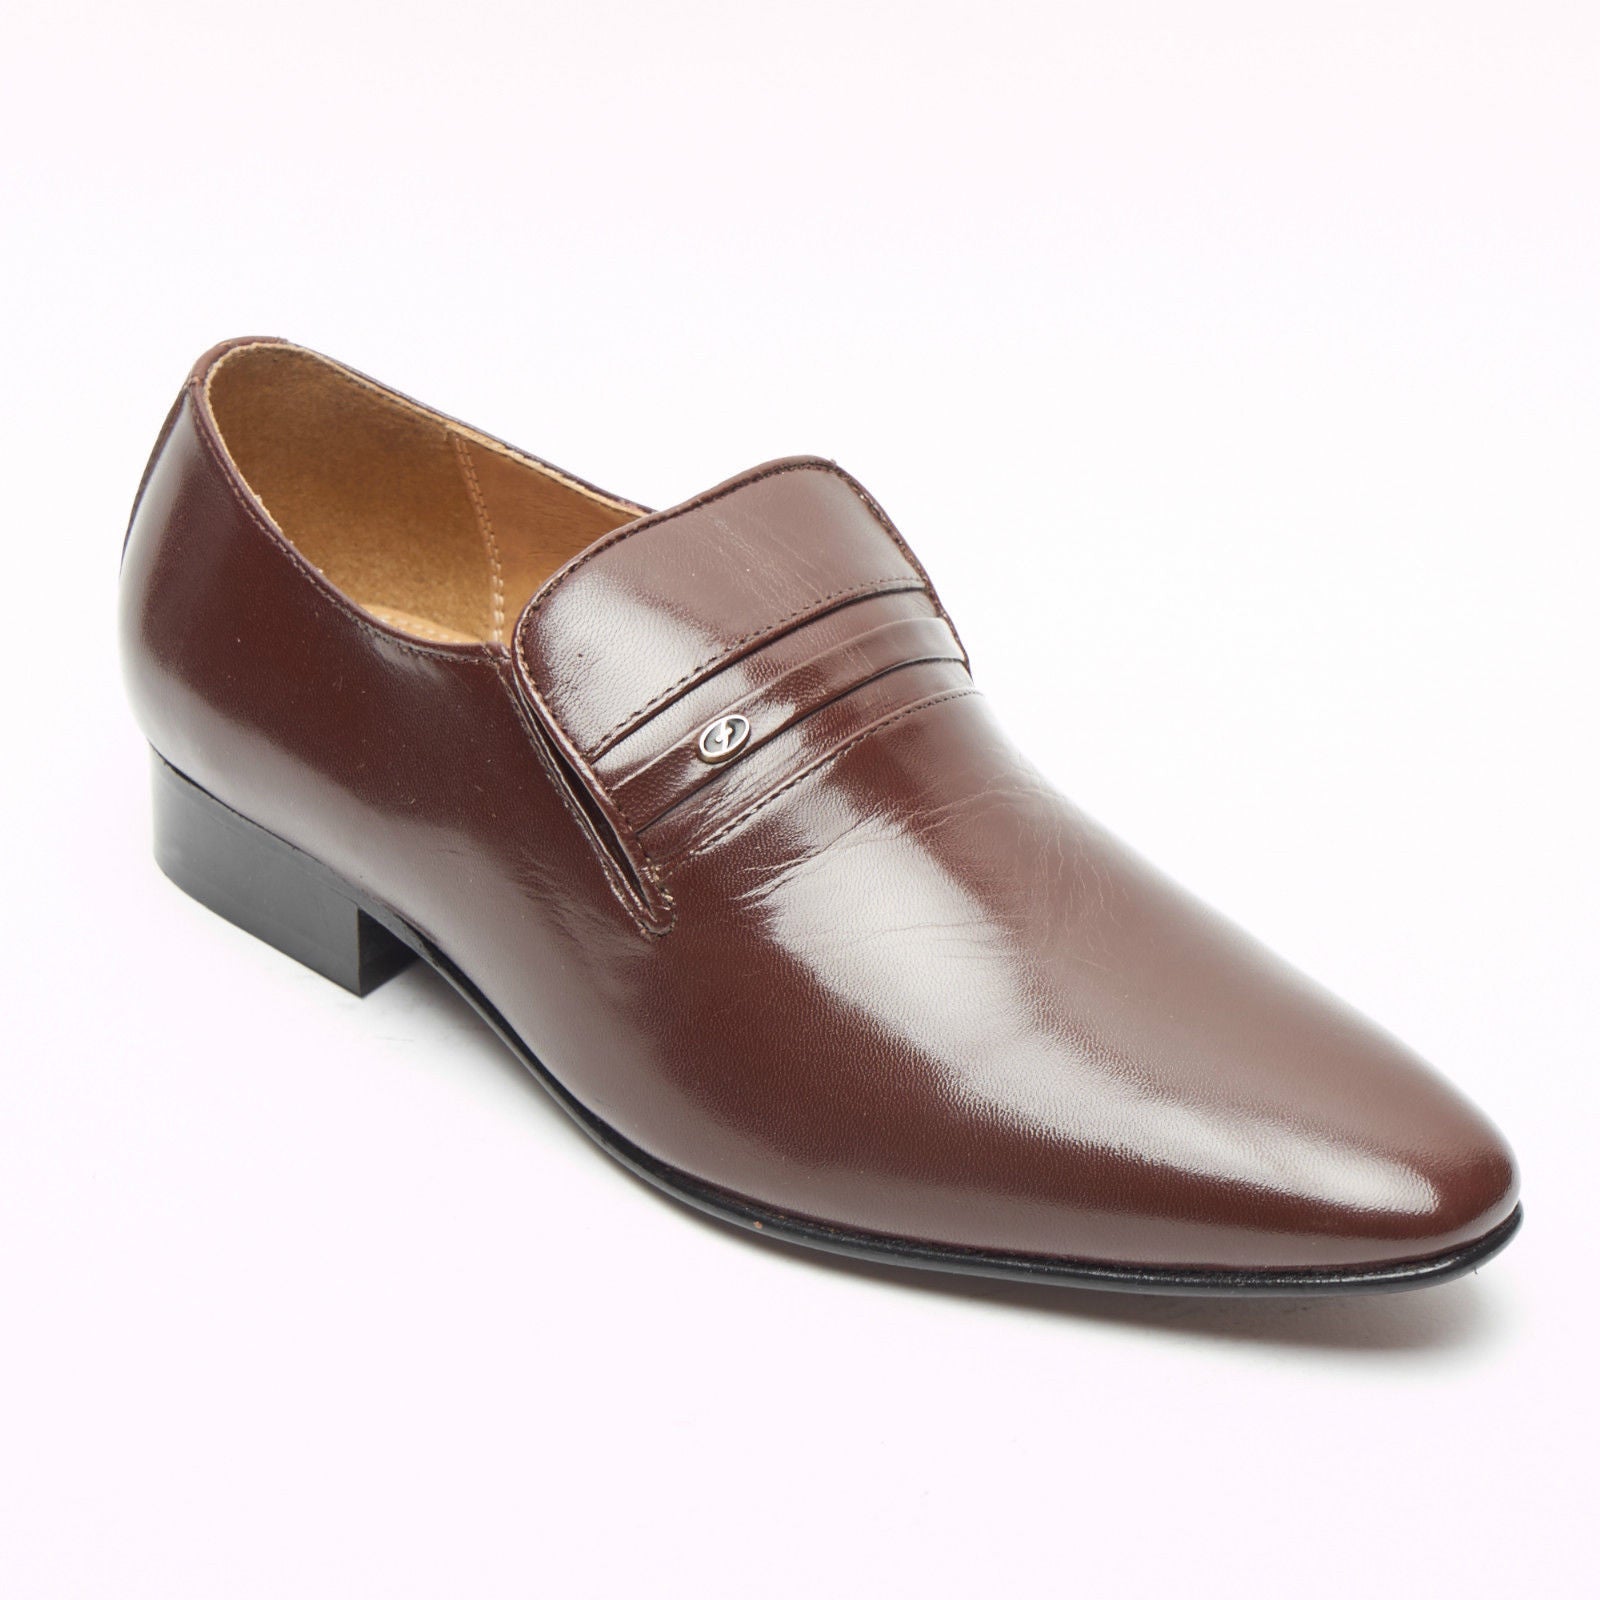 Mens Leather Spanish Shoes - 33453